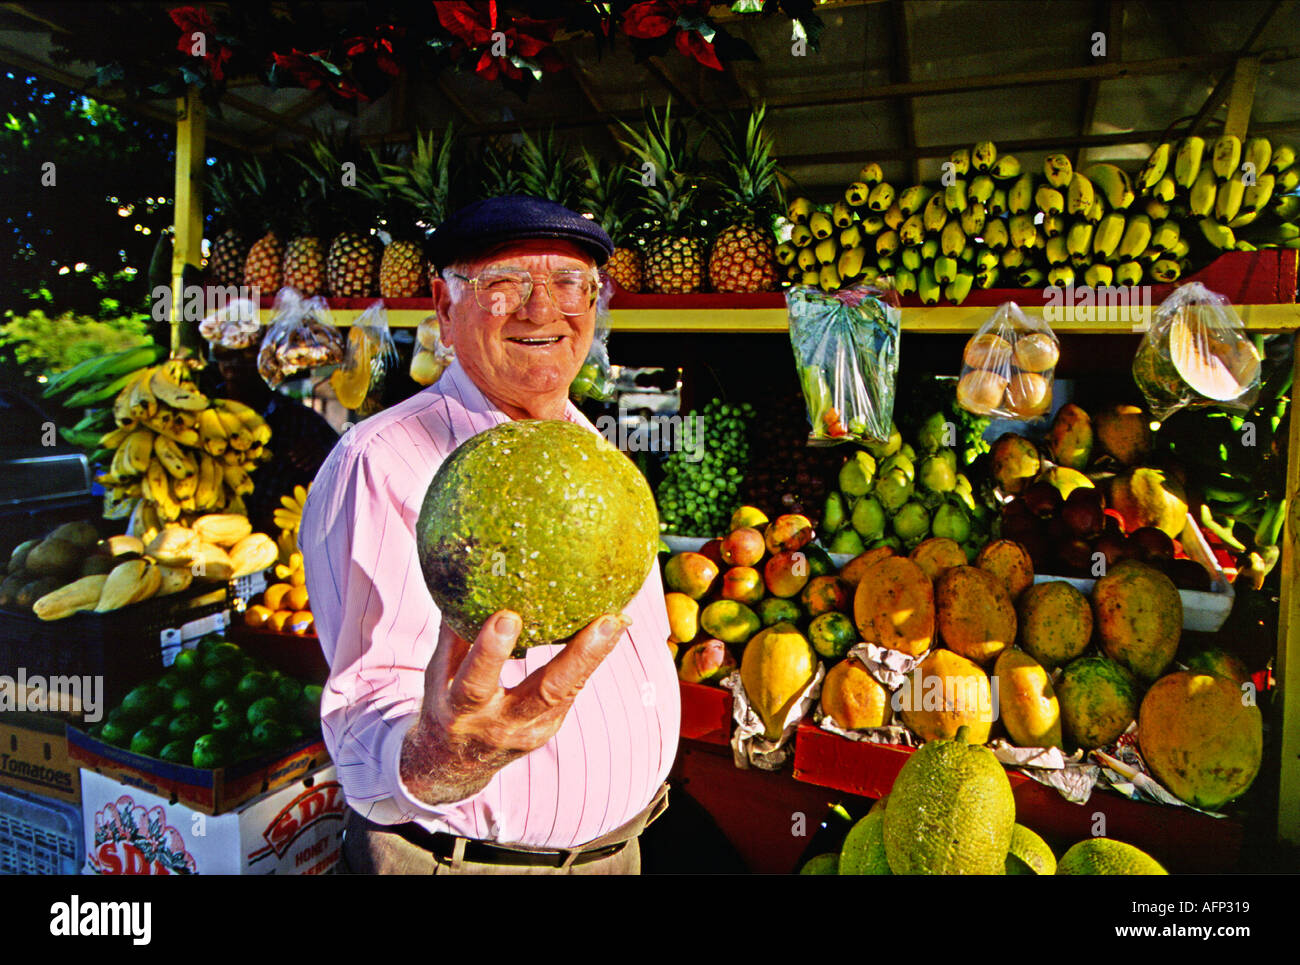 USA Old San Juan Puerto Rico Smiling mature fruit vender on street corner selling colorful produce to people Stock Photo